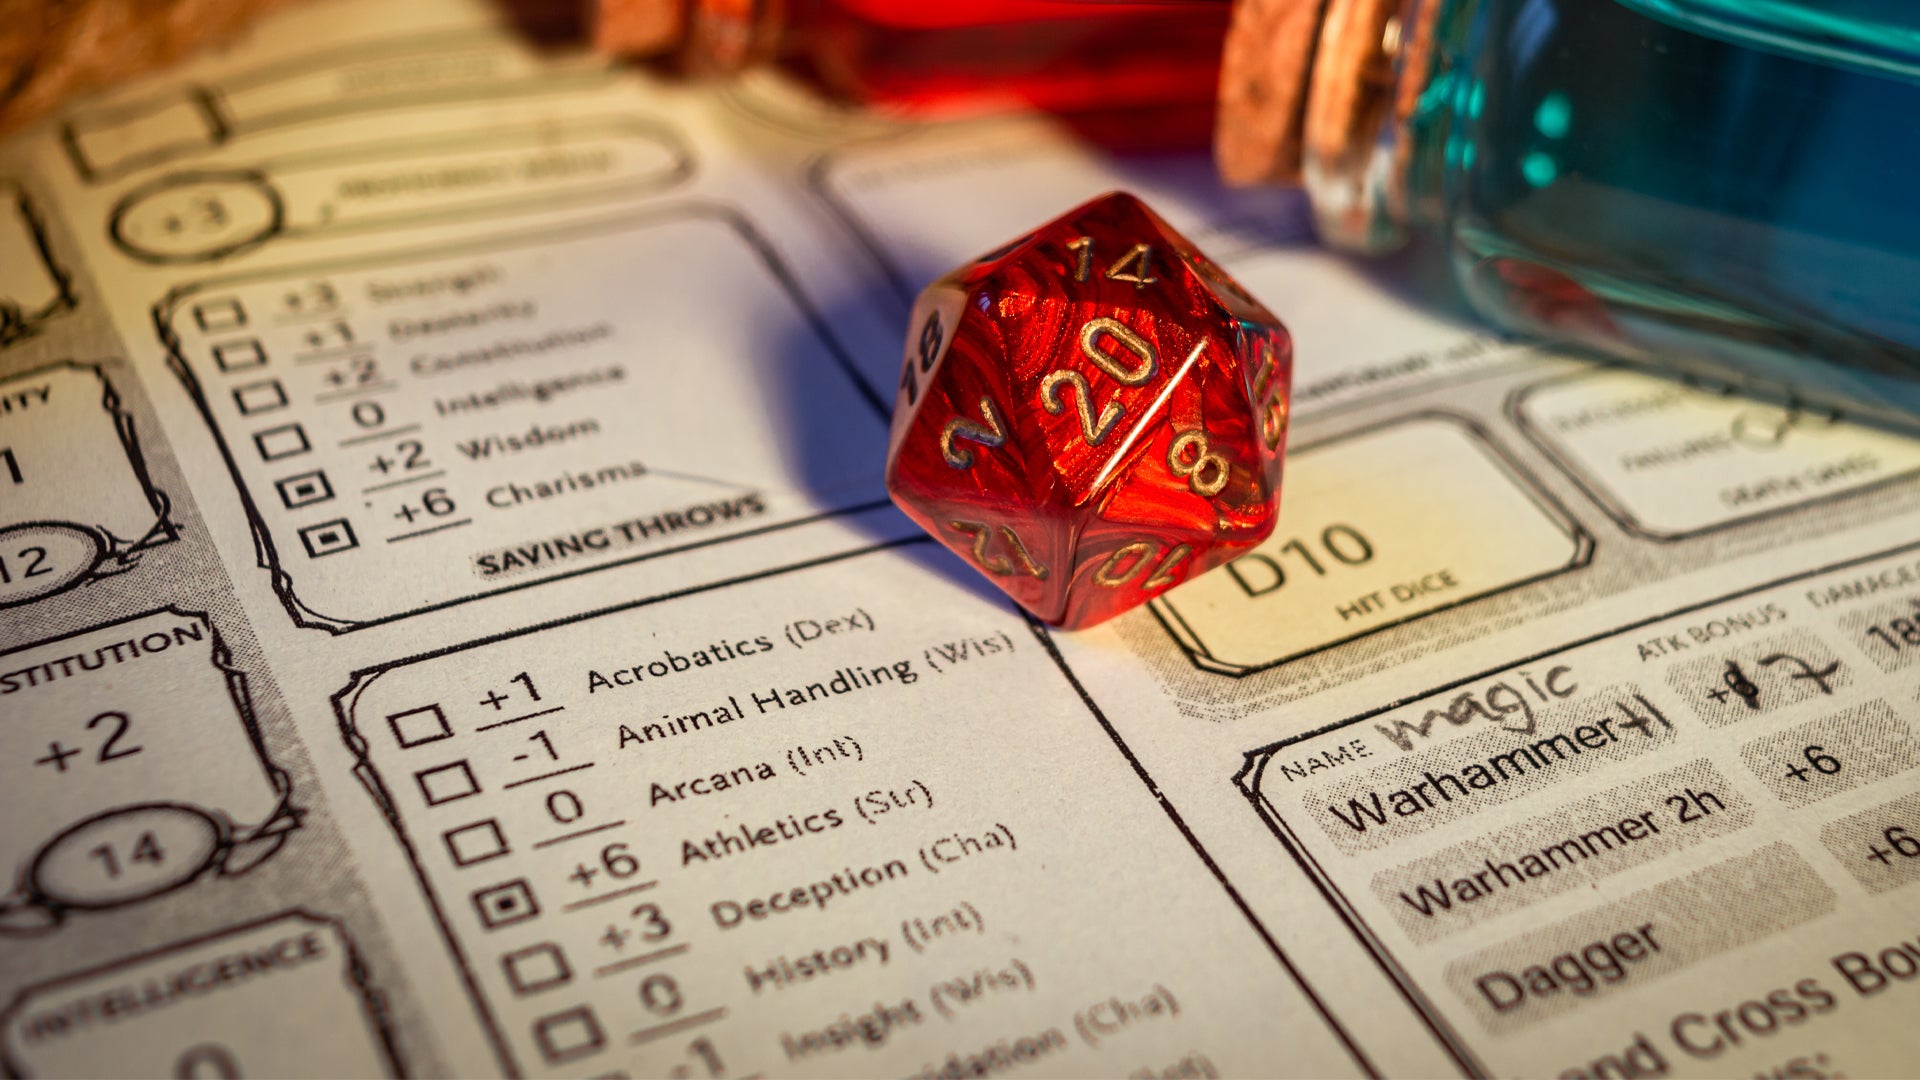 Image for 10 best D&D character creators for players, NPCs and more